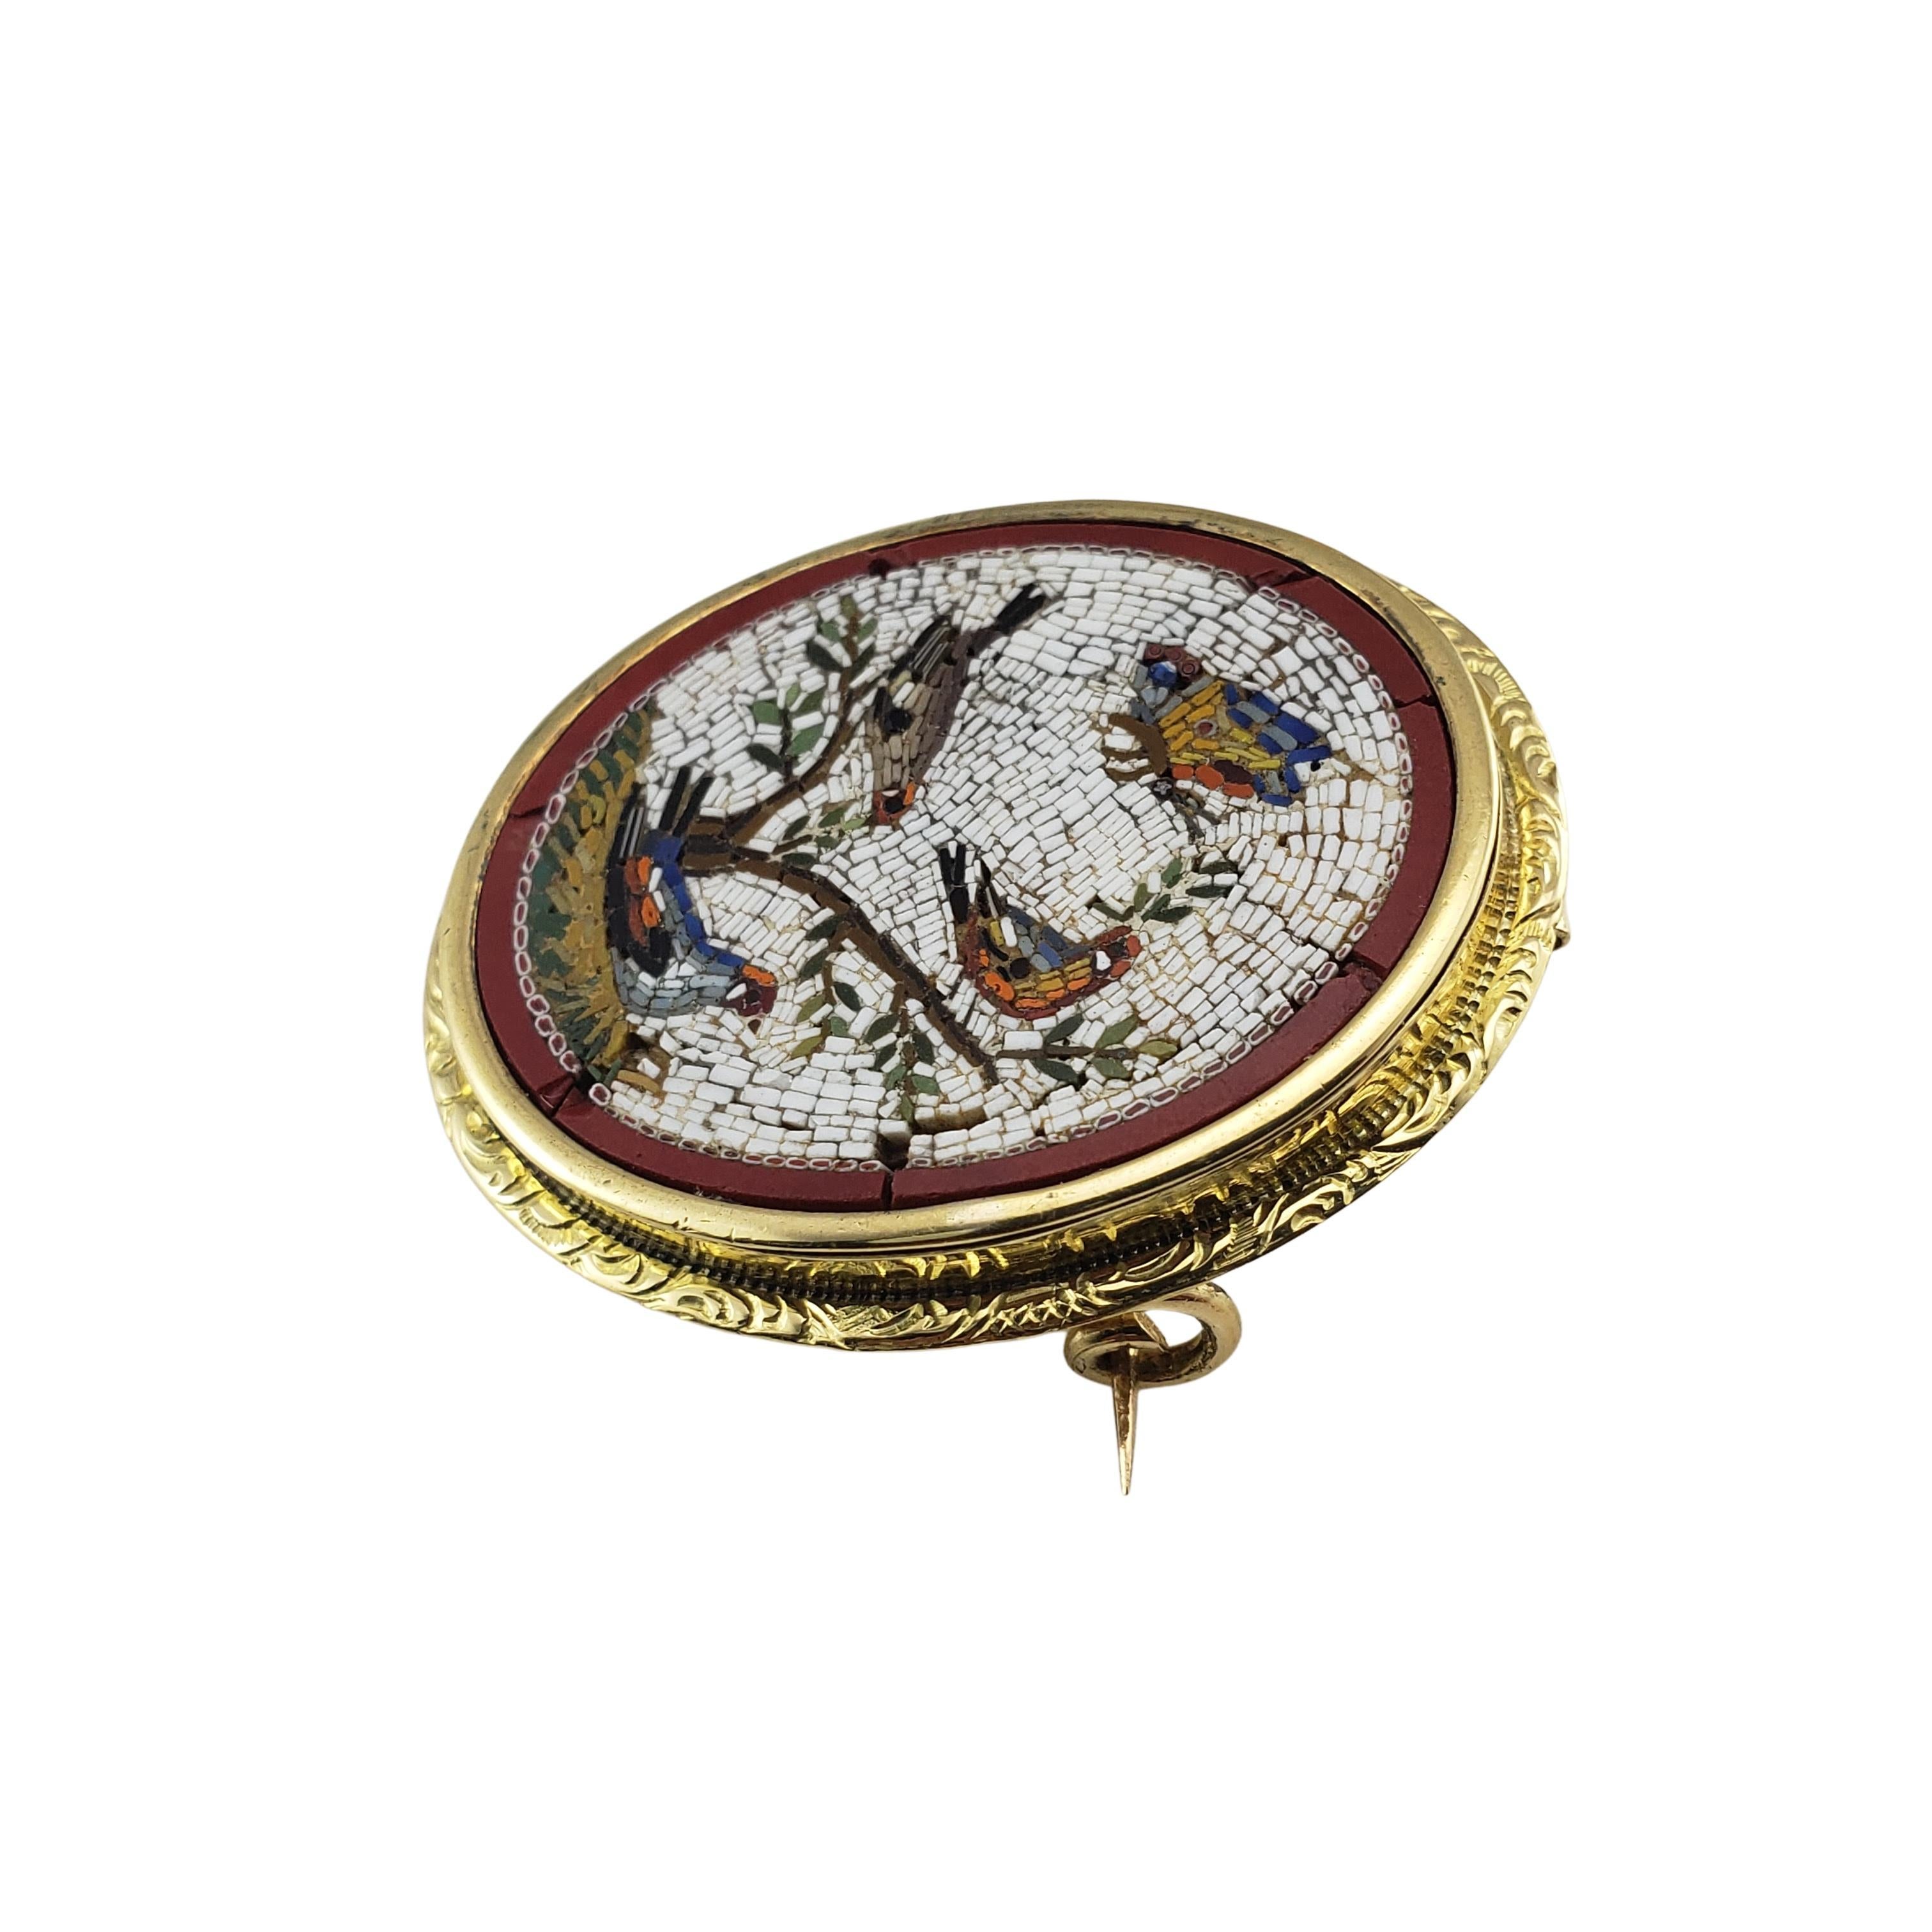 18 Karat Yellow Gold Micro Mosaic Brooch/Pin-

This elegant mosaic brooch depicts a lovely bird scene set in beautifully detailed 18K yellow gold.

*Please note - some mosaic tiles are missing and/or damaged.

Size: 34 mm x 28 mm

Weight:  7.2 dwt.